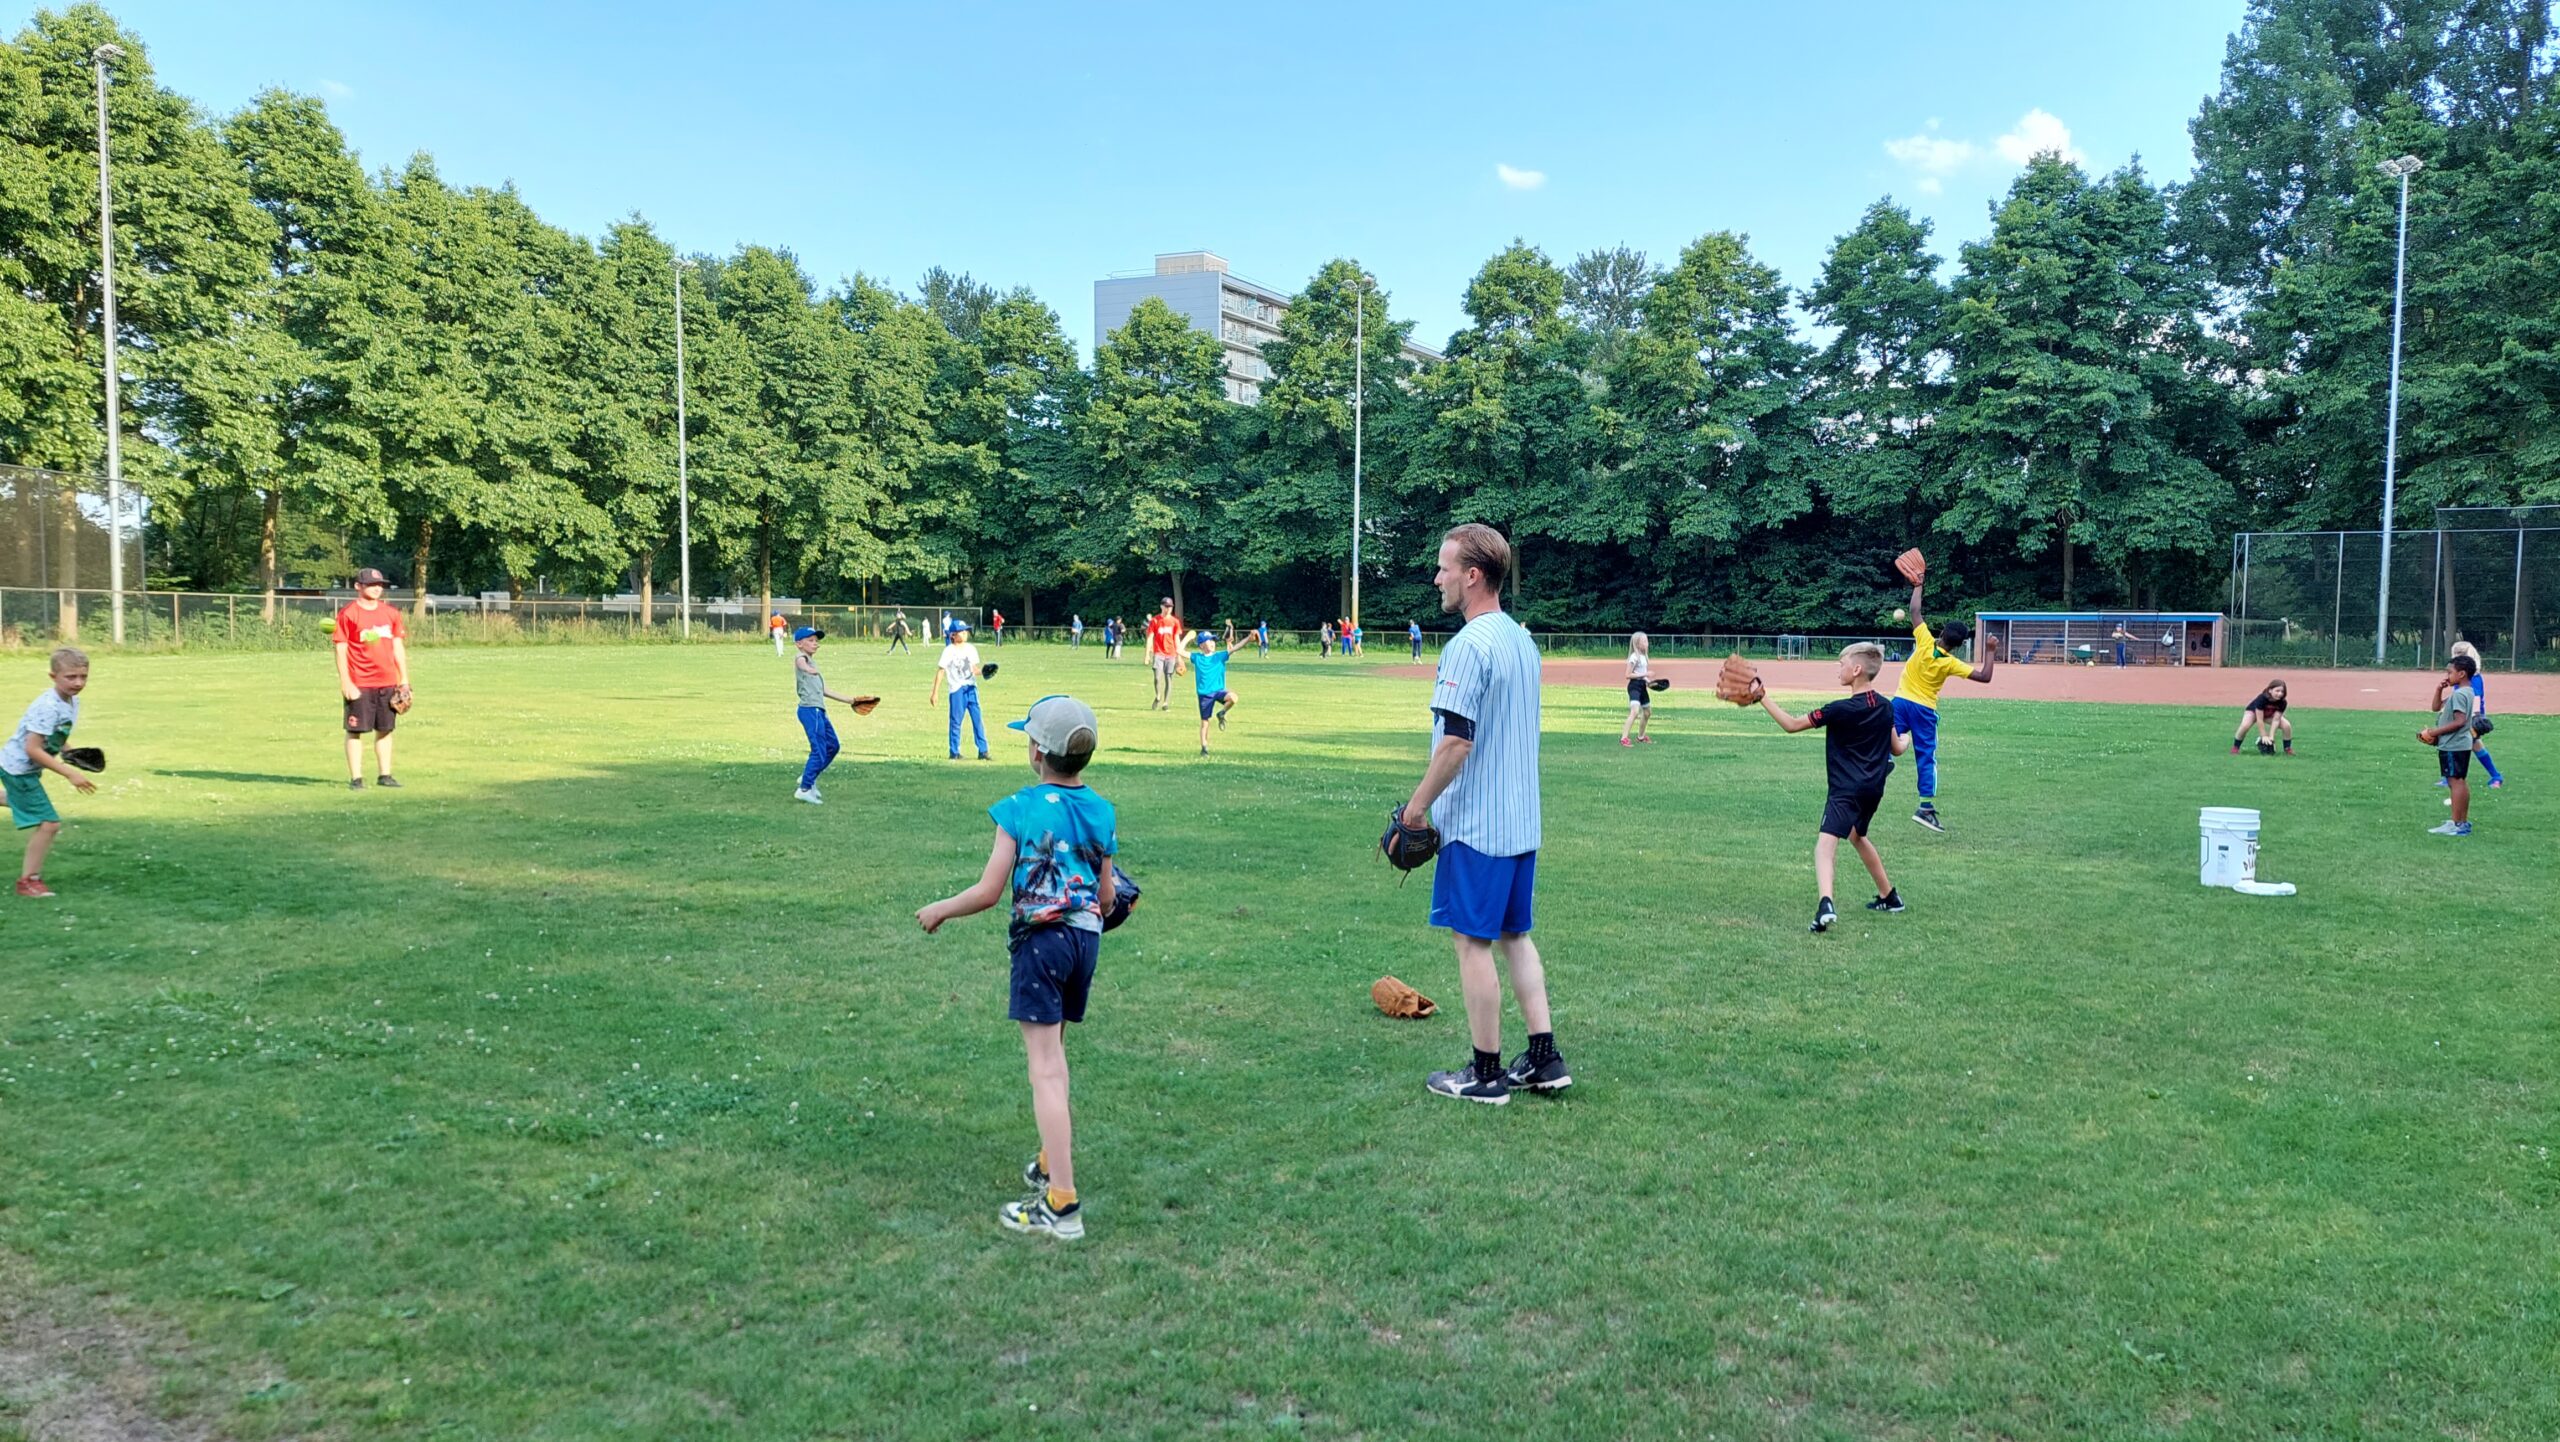 The Blue Hawks bring baseball’s best player to Zwolle